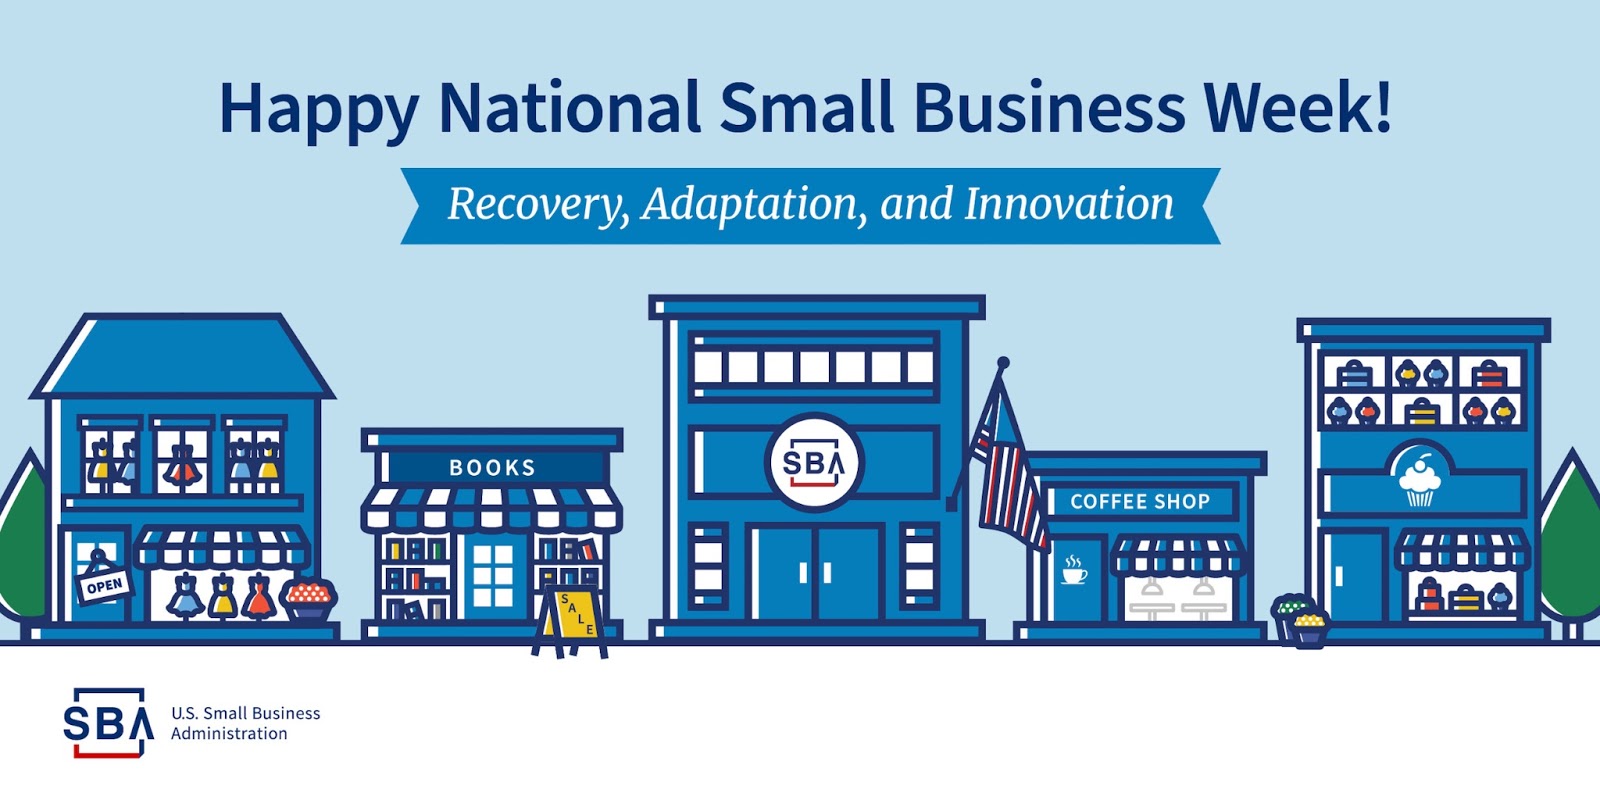 On Small Business Week, Here’s What YCDC is Doing to Support Local Businesses Photo